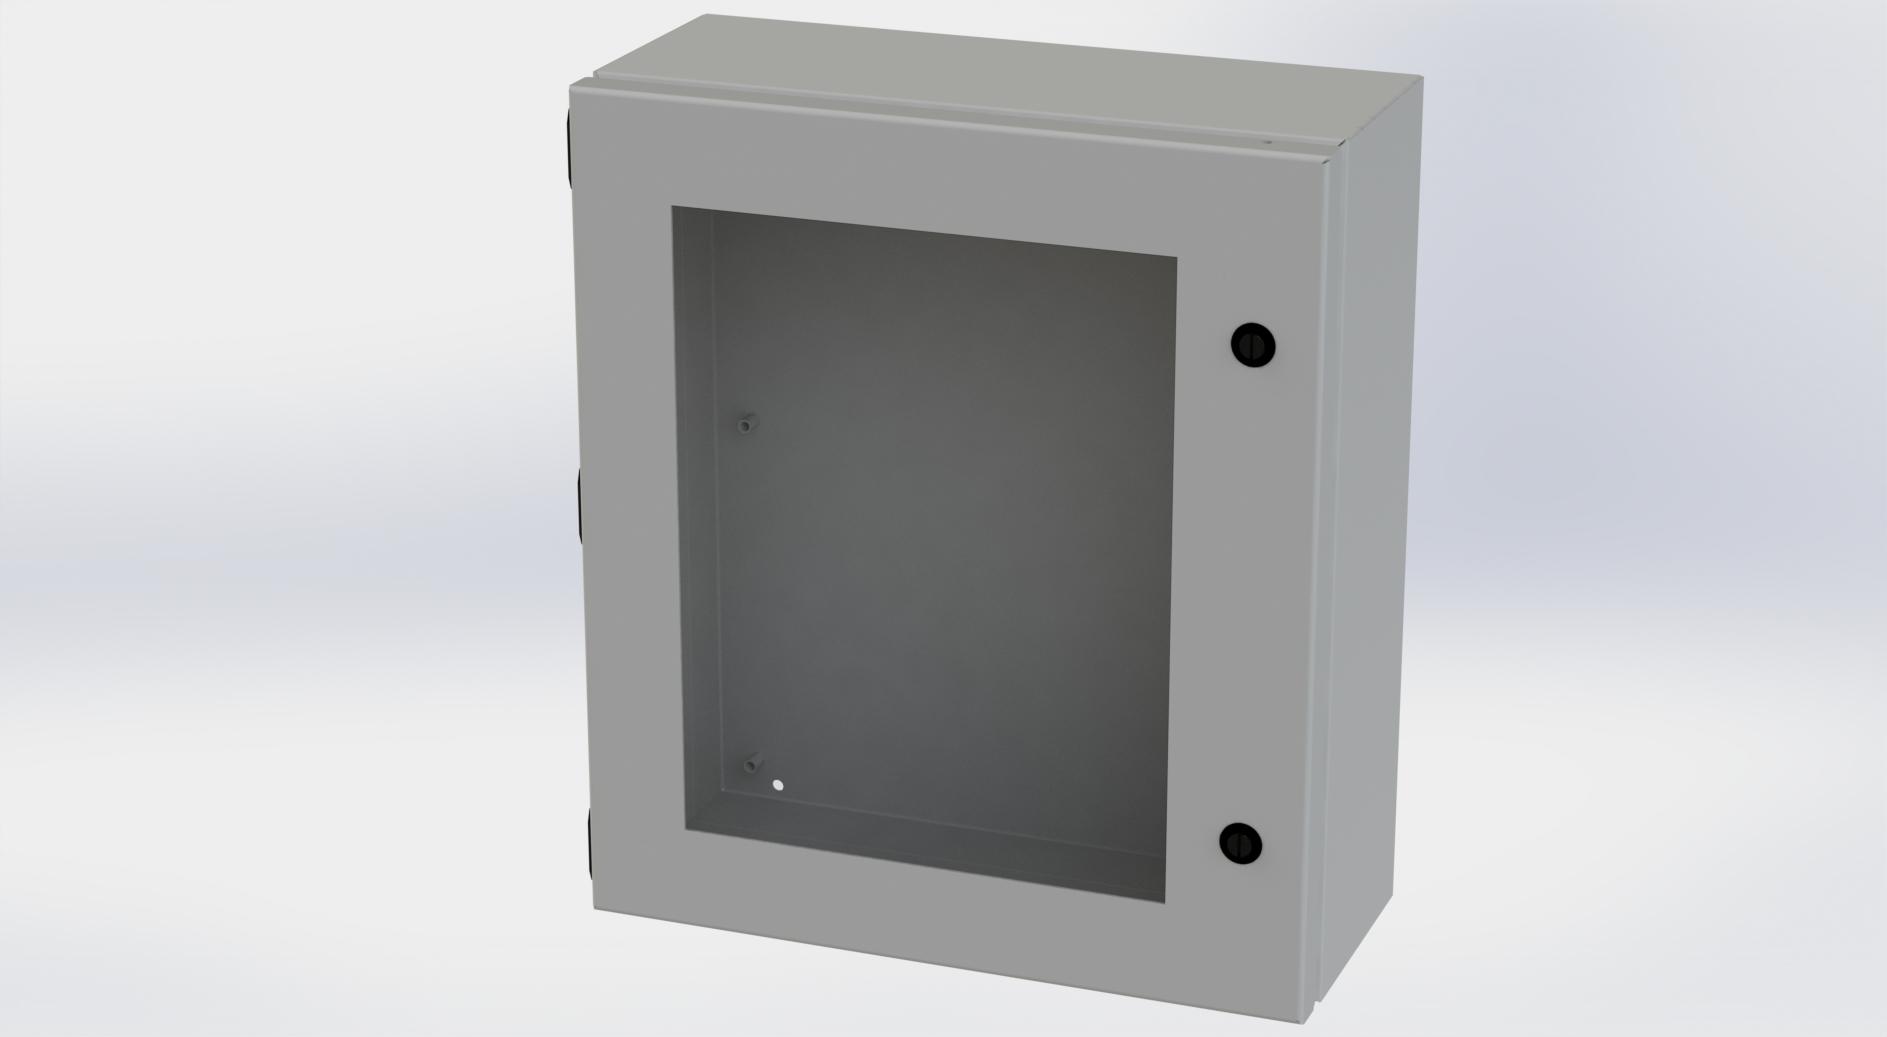 Saginaw Control SCE-1614ELJW ELJ Enclosure W/Viewing Window, Height:16.00", Width:14.00", Depth:6.00", ANSI-61 gray powder coating inside and out. Optional sub-panels are powder coated white.